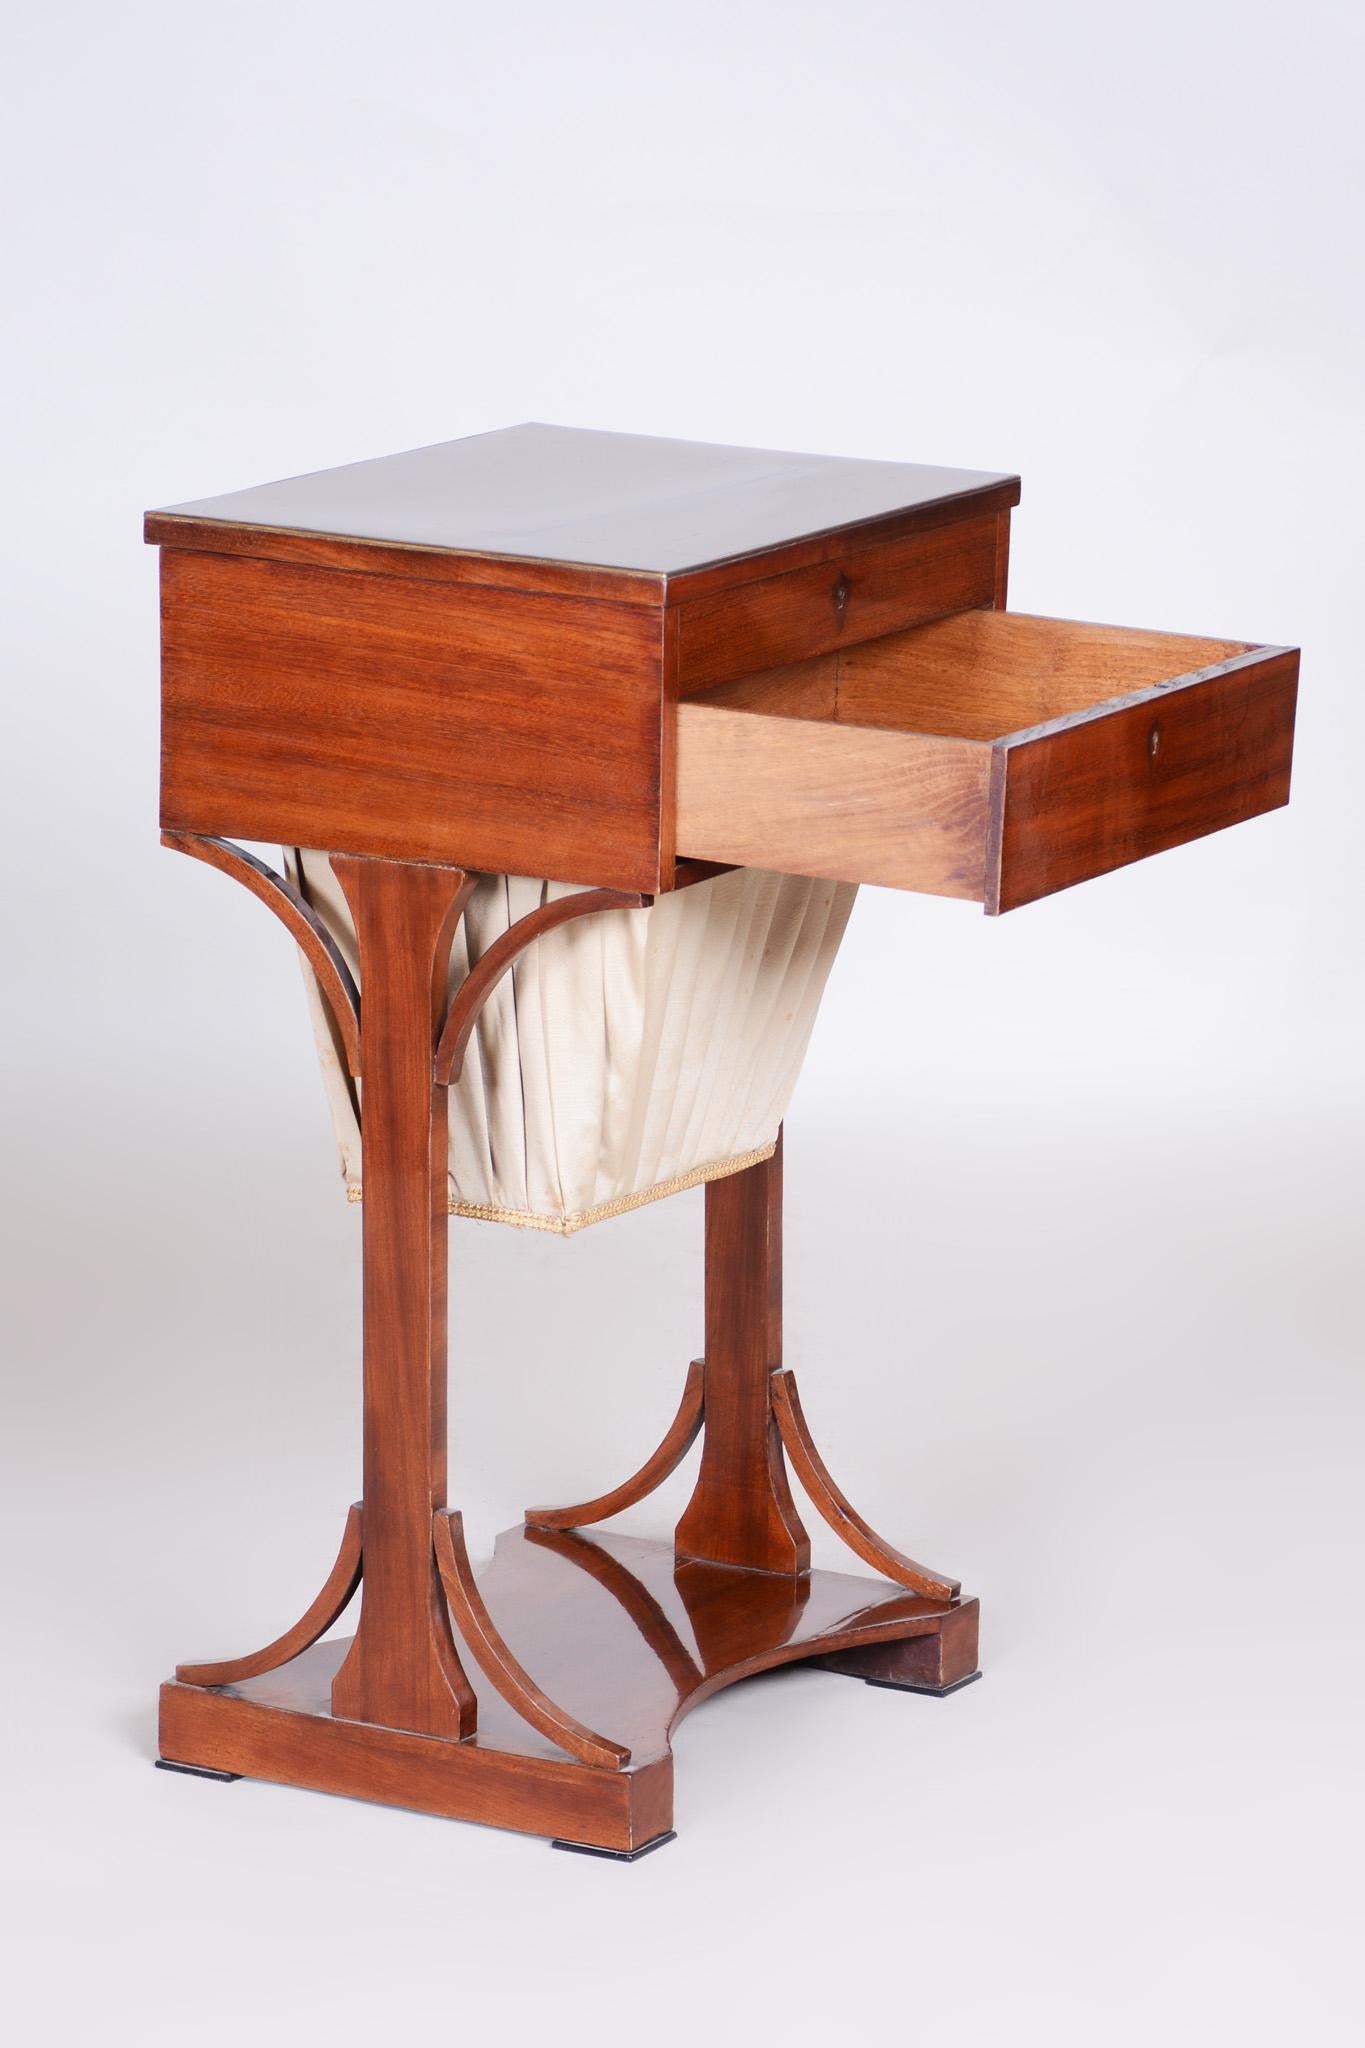 19th Century Restored German Biedermeier Table, Made with Mahogany, 1820s For Sale 7